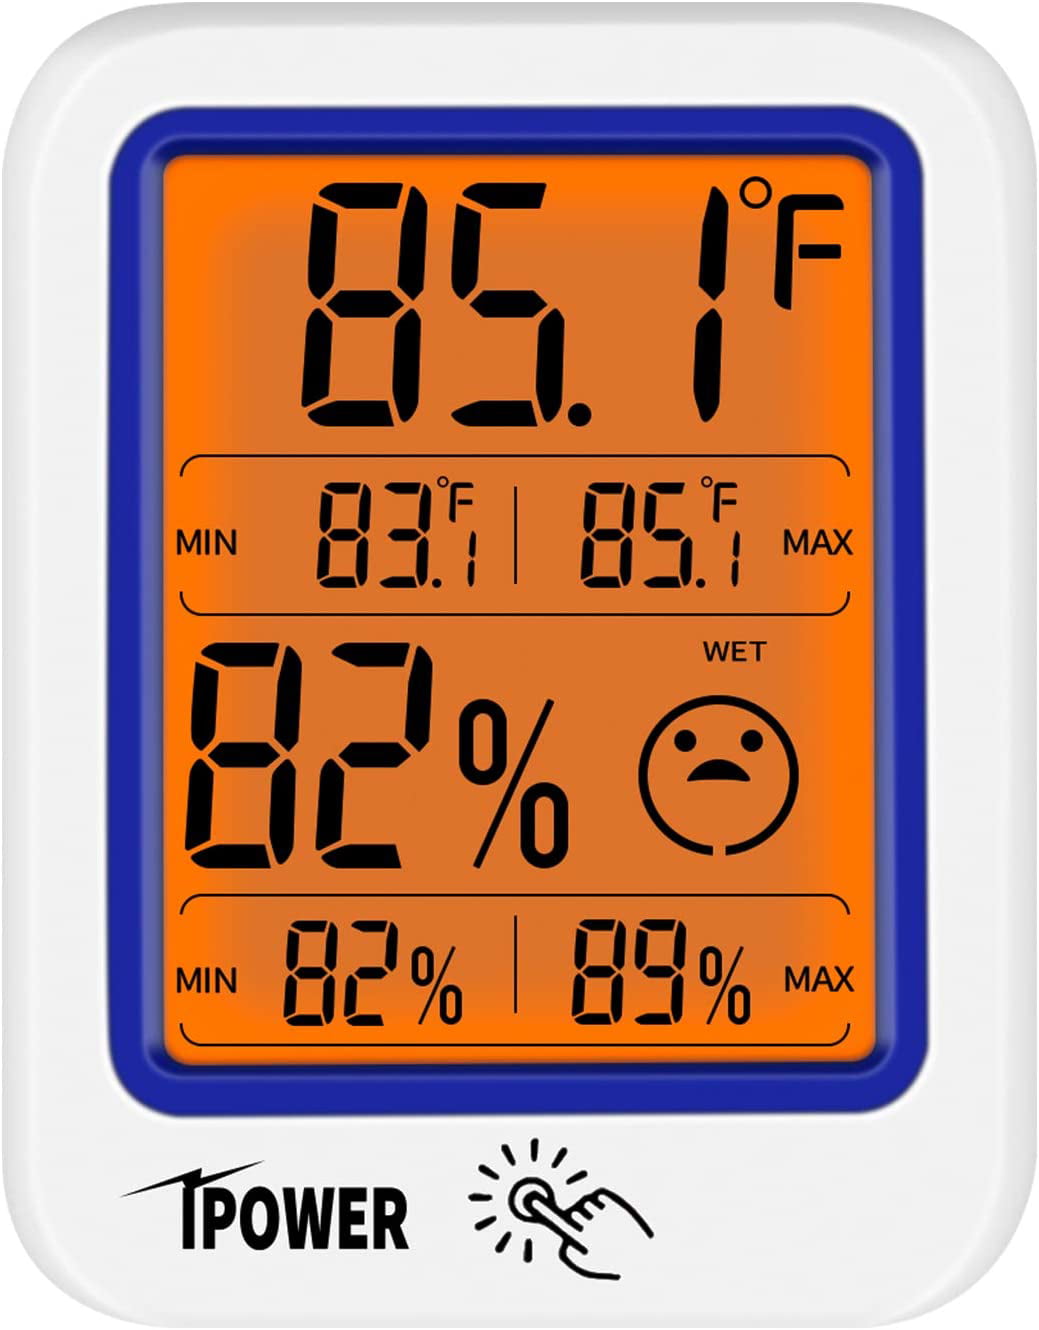 Indoor Outdoor Thermometer Humidity with Touchscreen and Backlight Greenhouse Office Temperature with Large LCD Screen ORIA Digital Wireless Hygrometer Min and Max Records for Home 